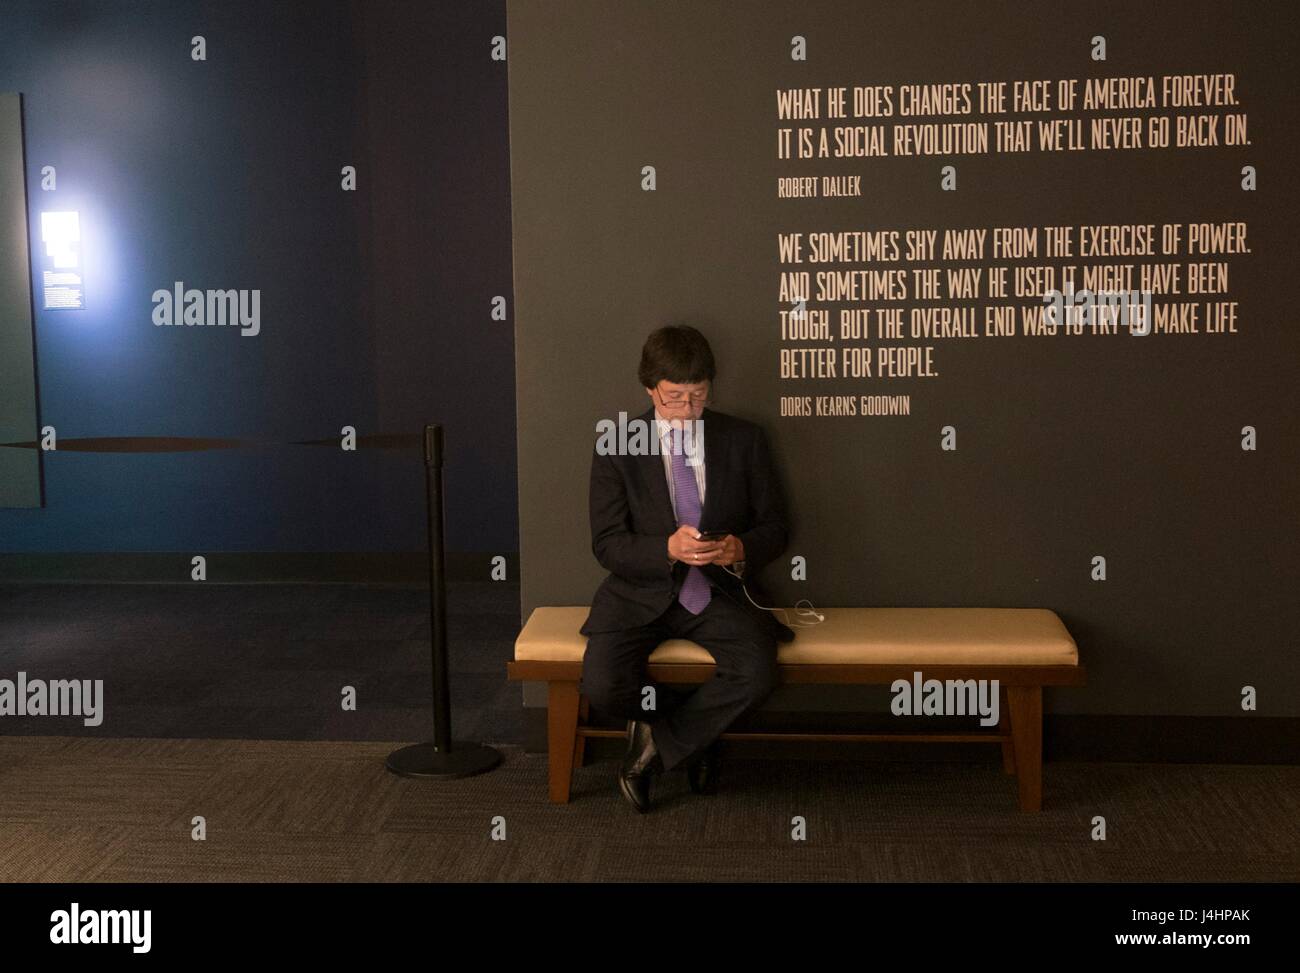 Documentary filmmaker Ken Burns checks his phone in the lobby before a screening of his upcoming PBS documentary series The Vietnam War at the LBJ Presidential Library April 27, 2017 in Austin, Texas.     (photo by Jay Godwin/LBJ Presidential Library  via Planetpix) Stock Photo